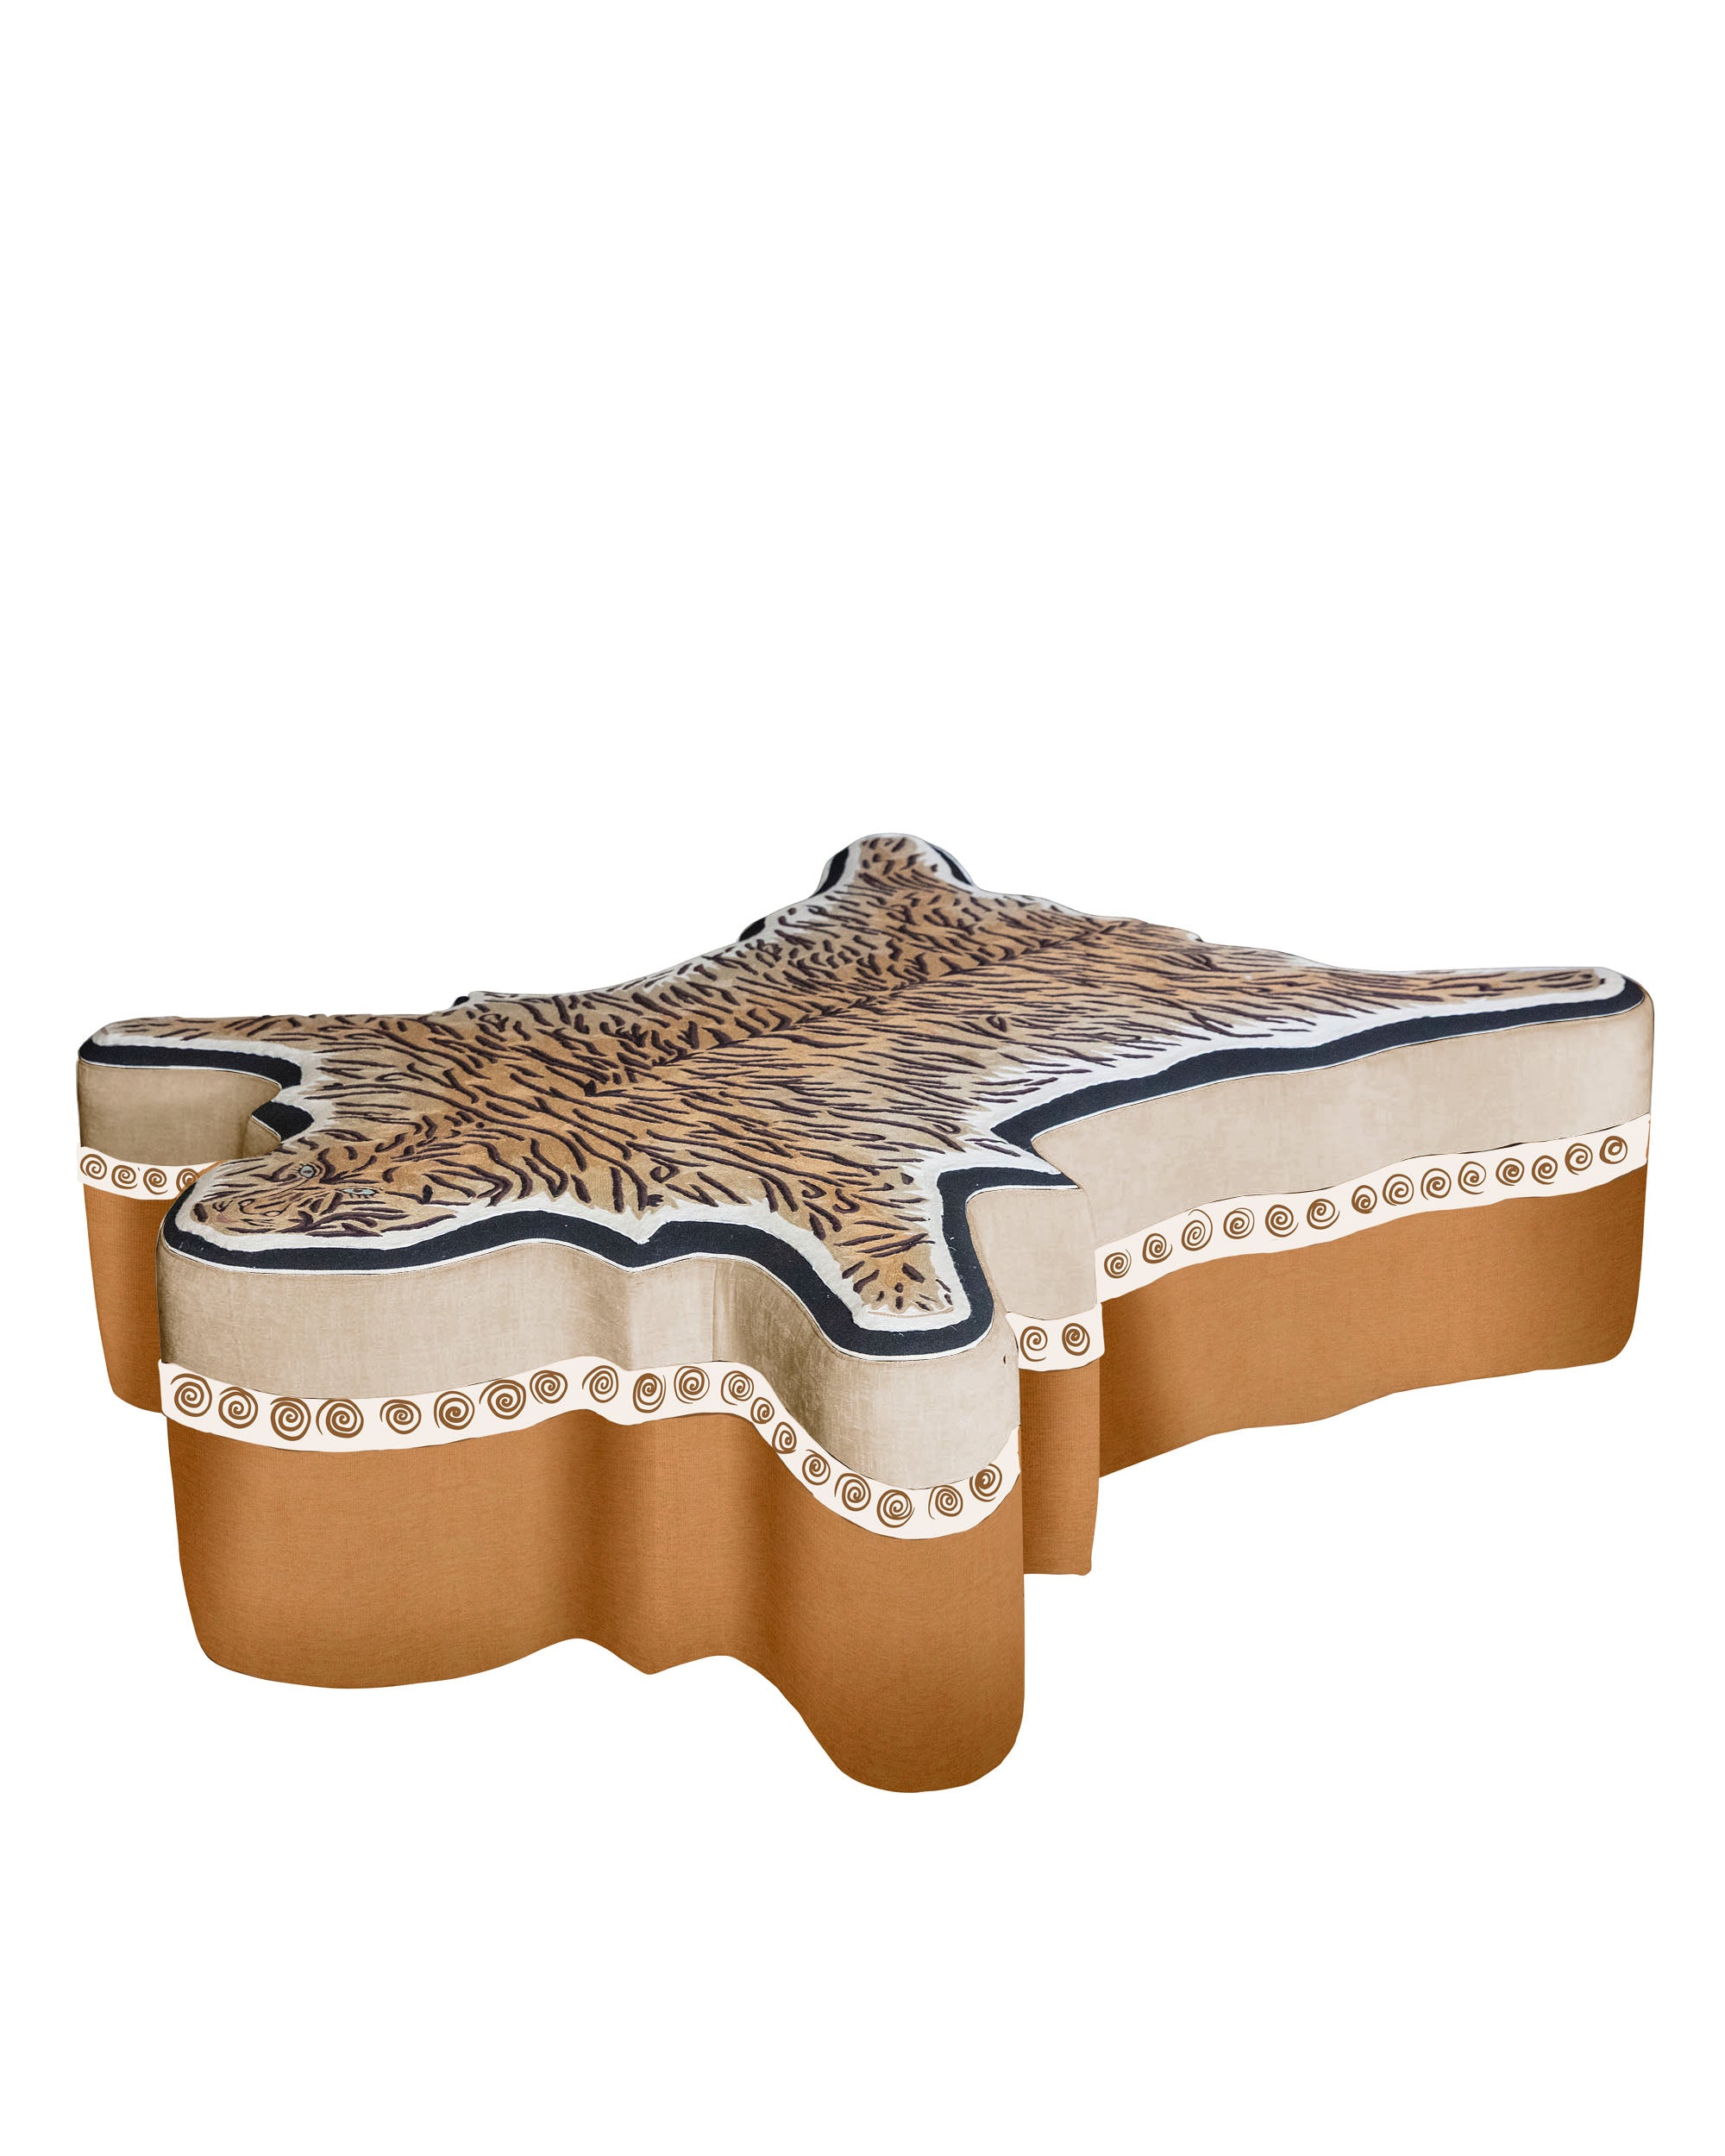  Upholstered ottoman with a tiger’s pelt embroidered in wool 100% (Amber)